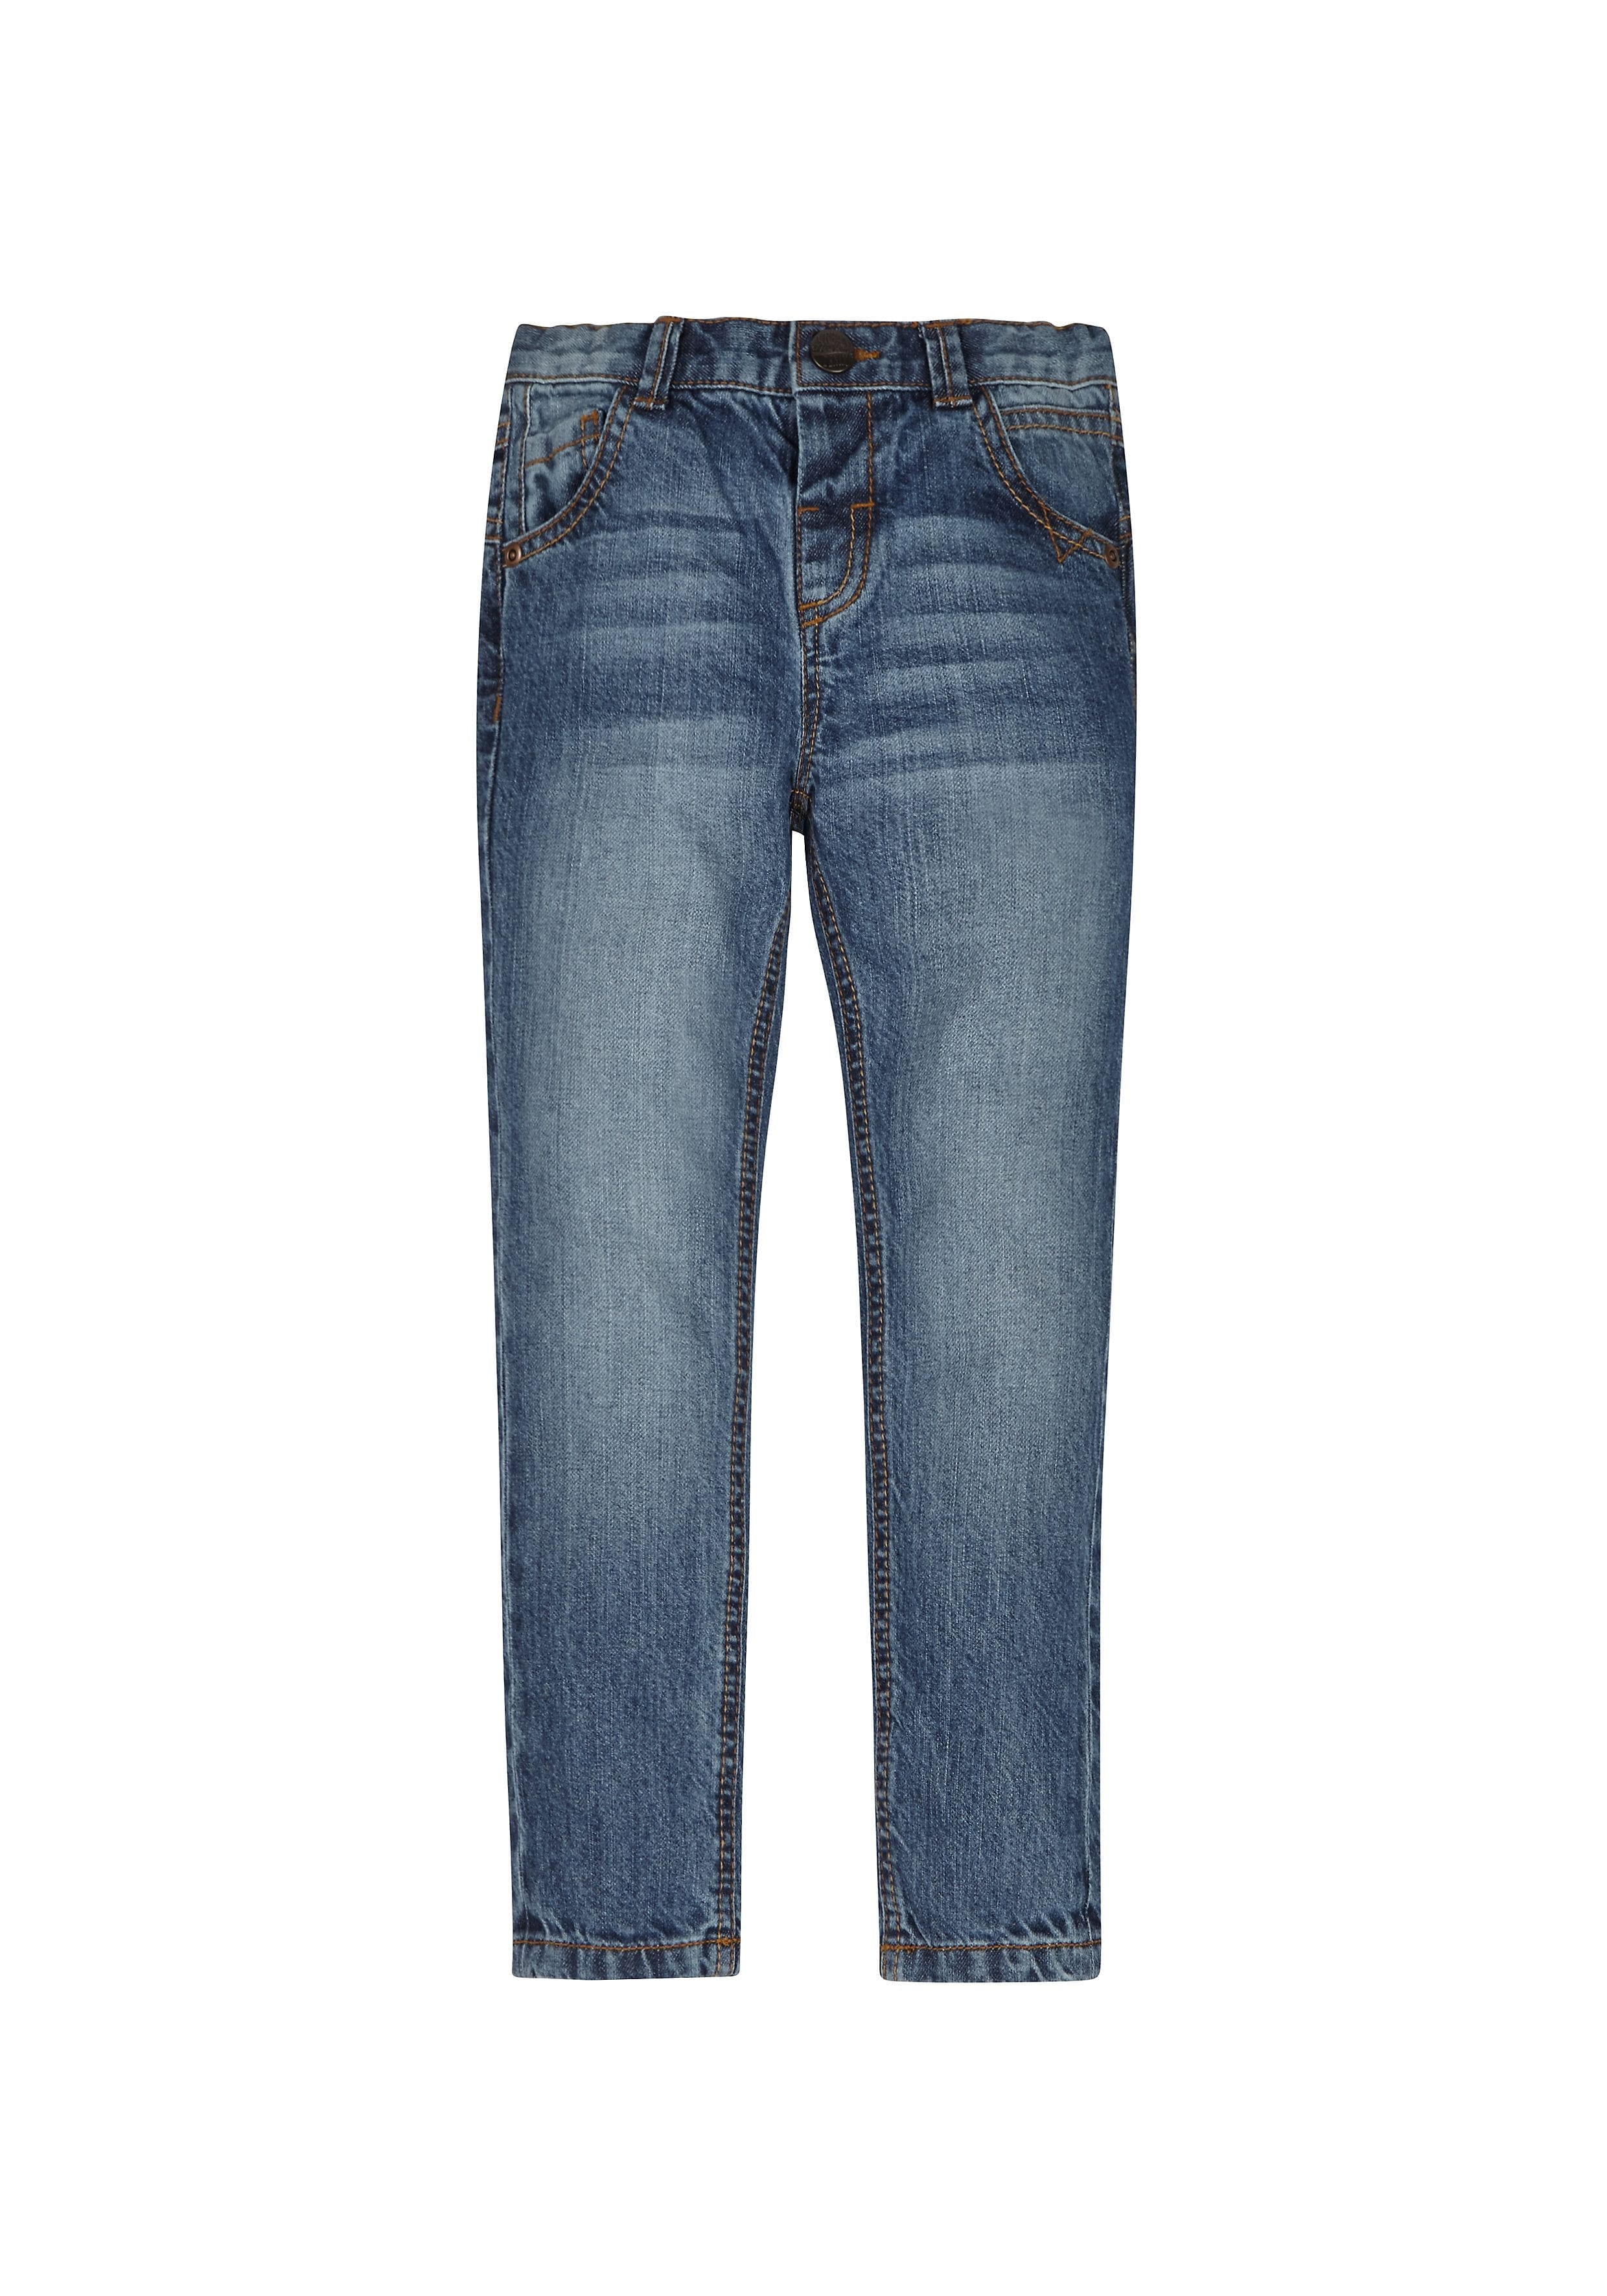 Mothercare | Boys Skinny Jeans - Blue 0